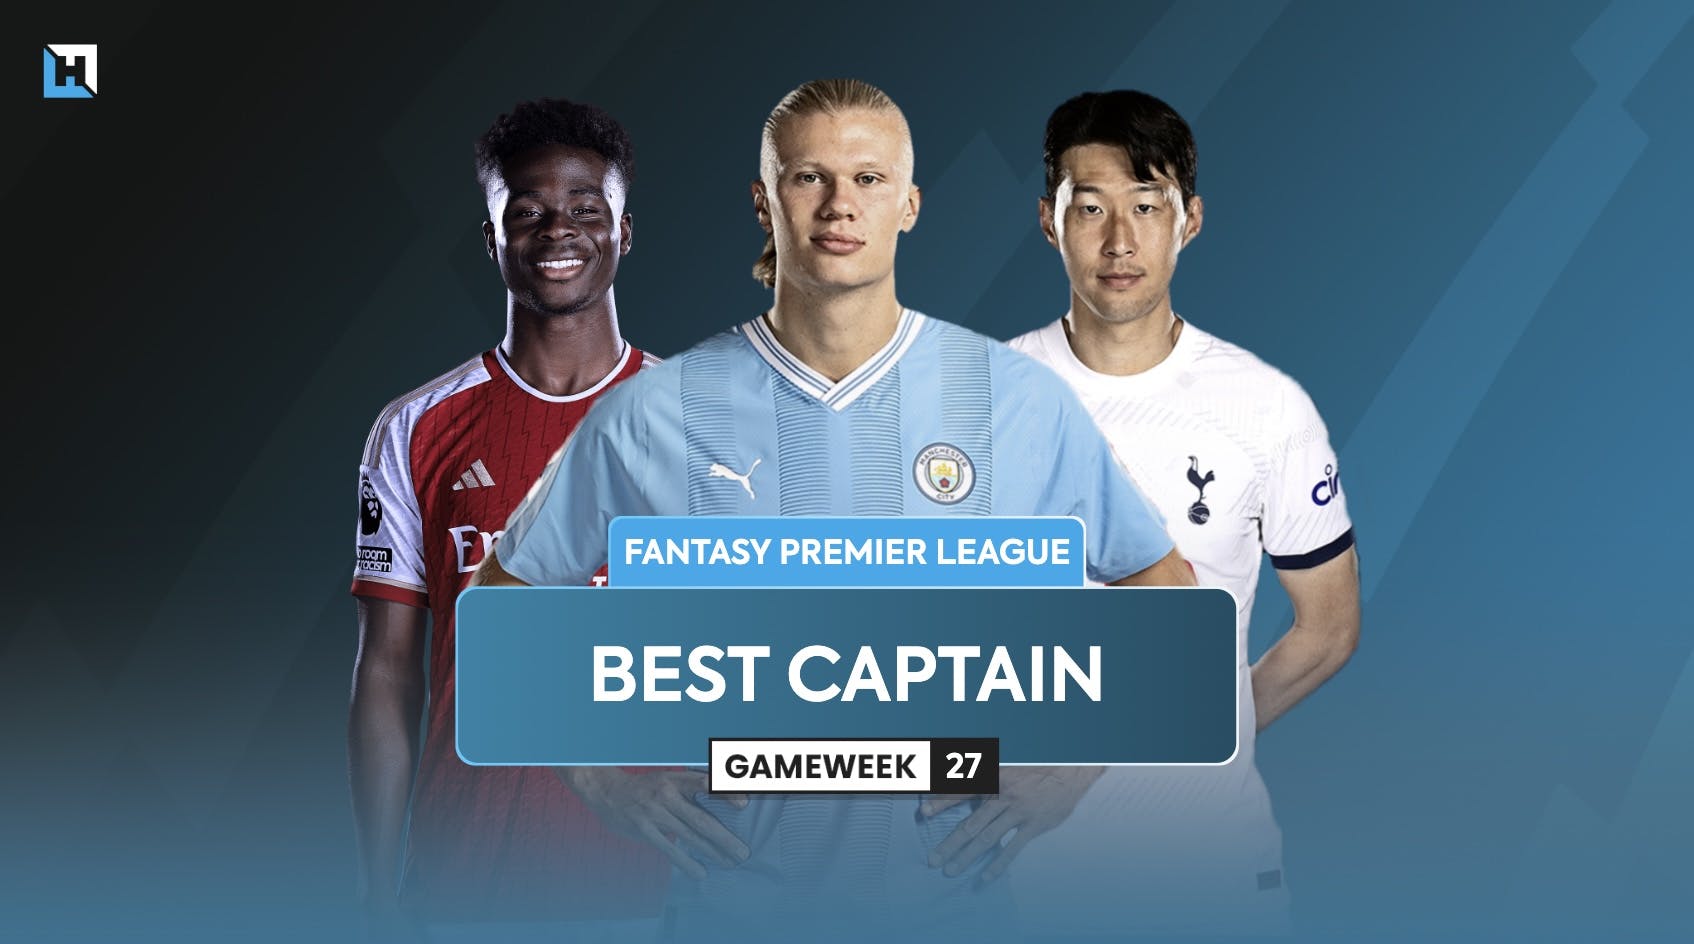 Who is the best FPL captain for Gameweek 27?